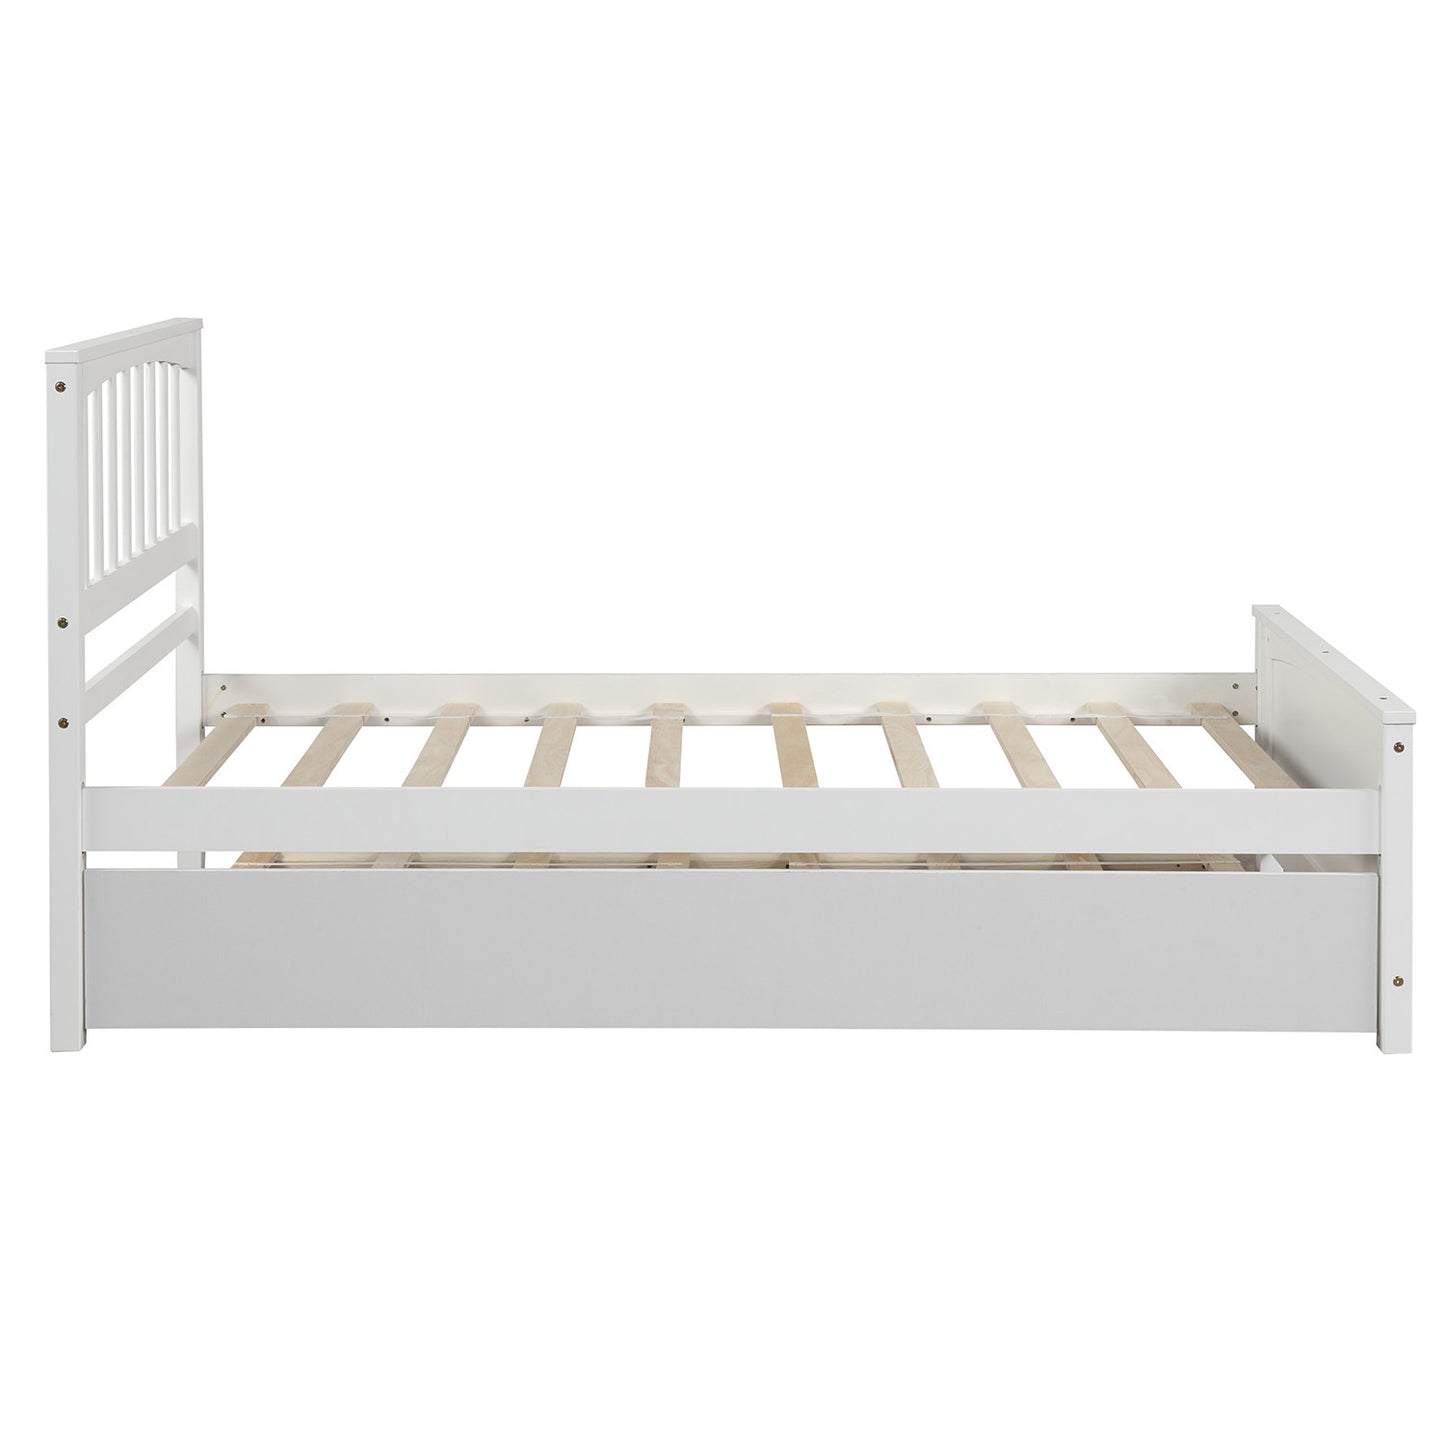 Twin size Platform Bed with Trundle, White